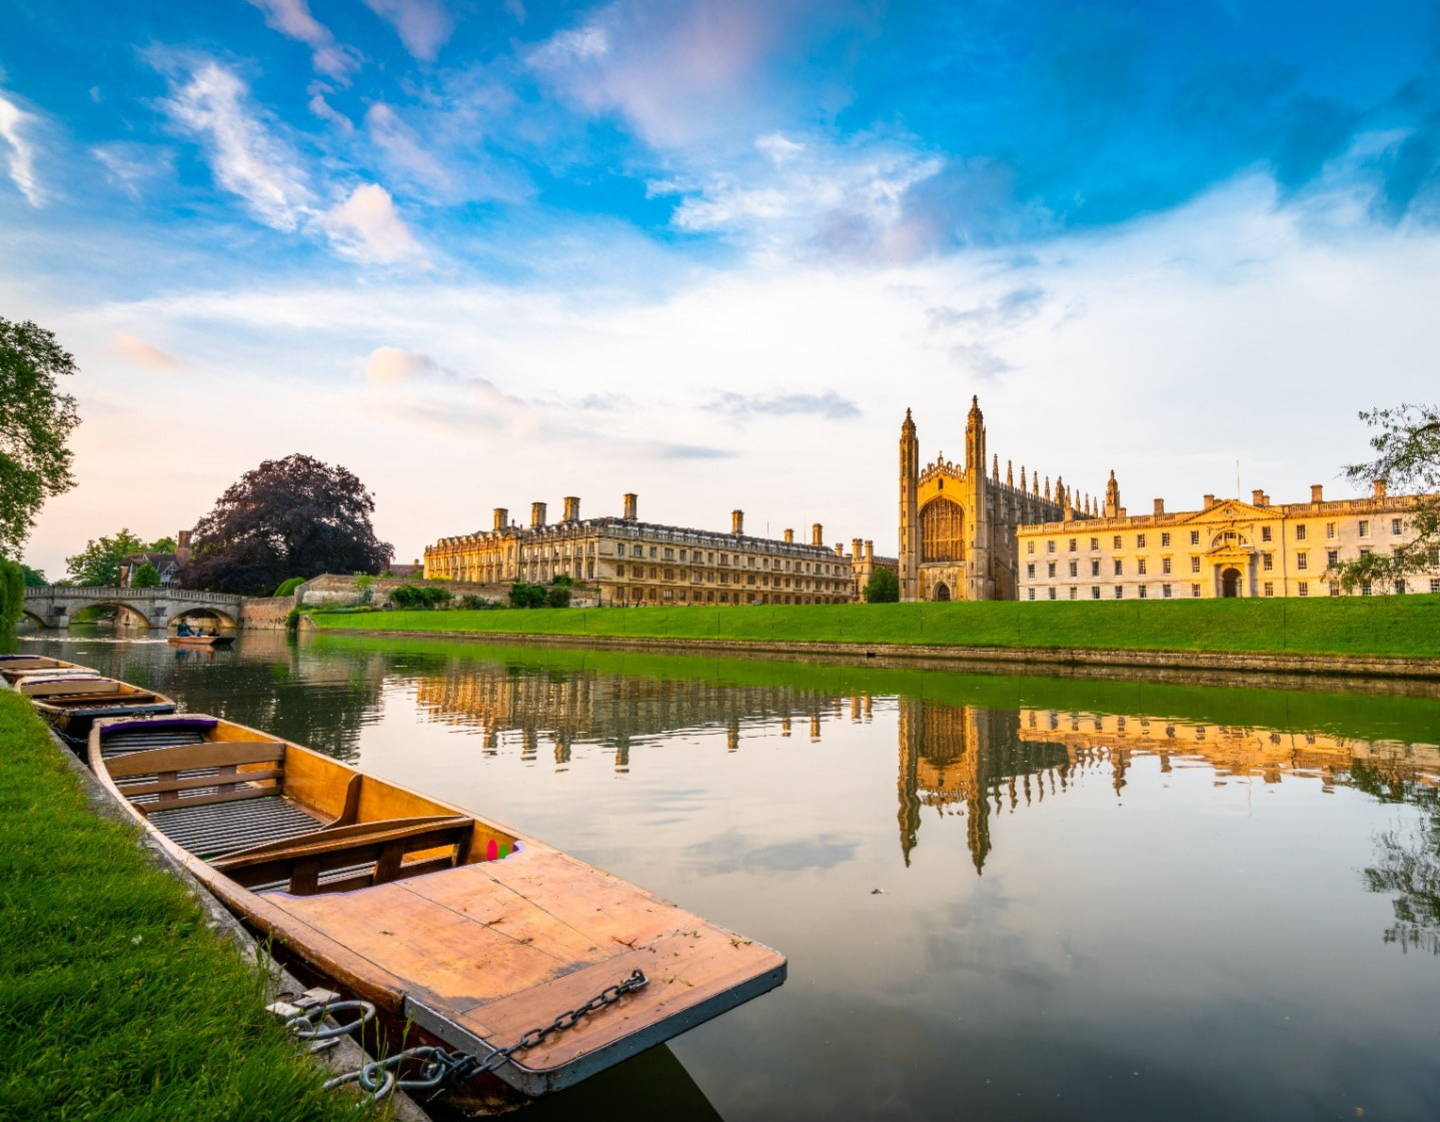 Select Cambridge is based right in the heart of the city